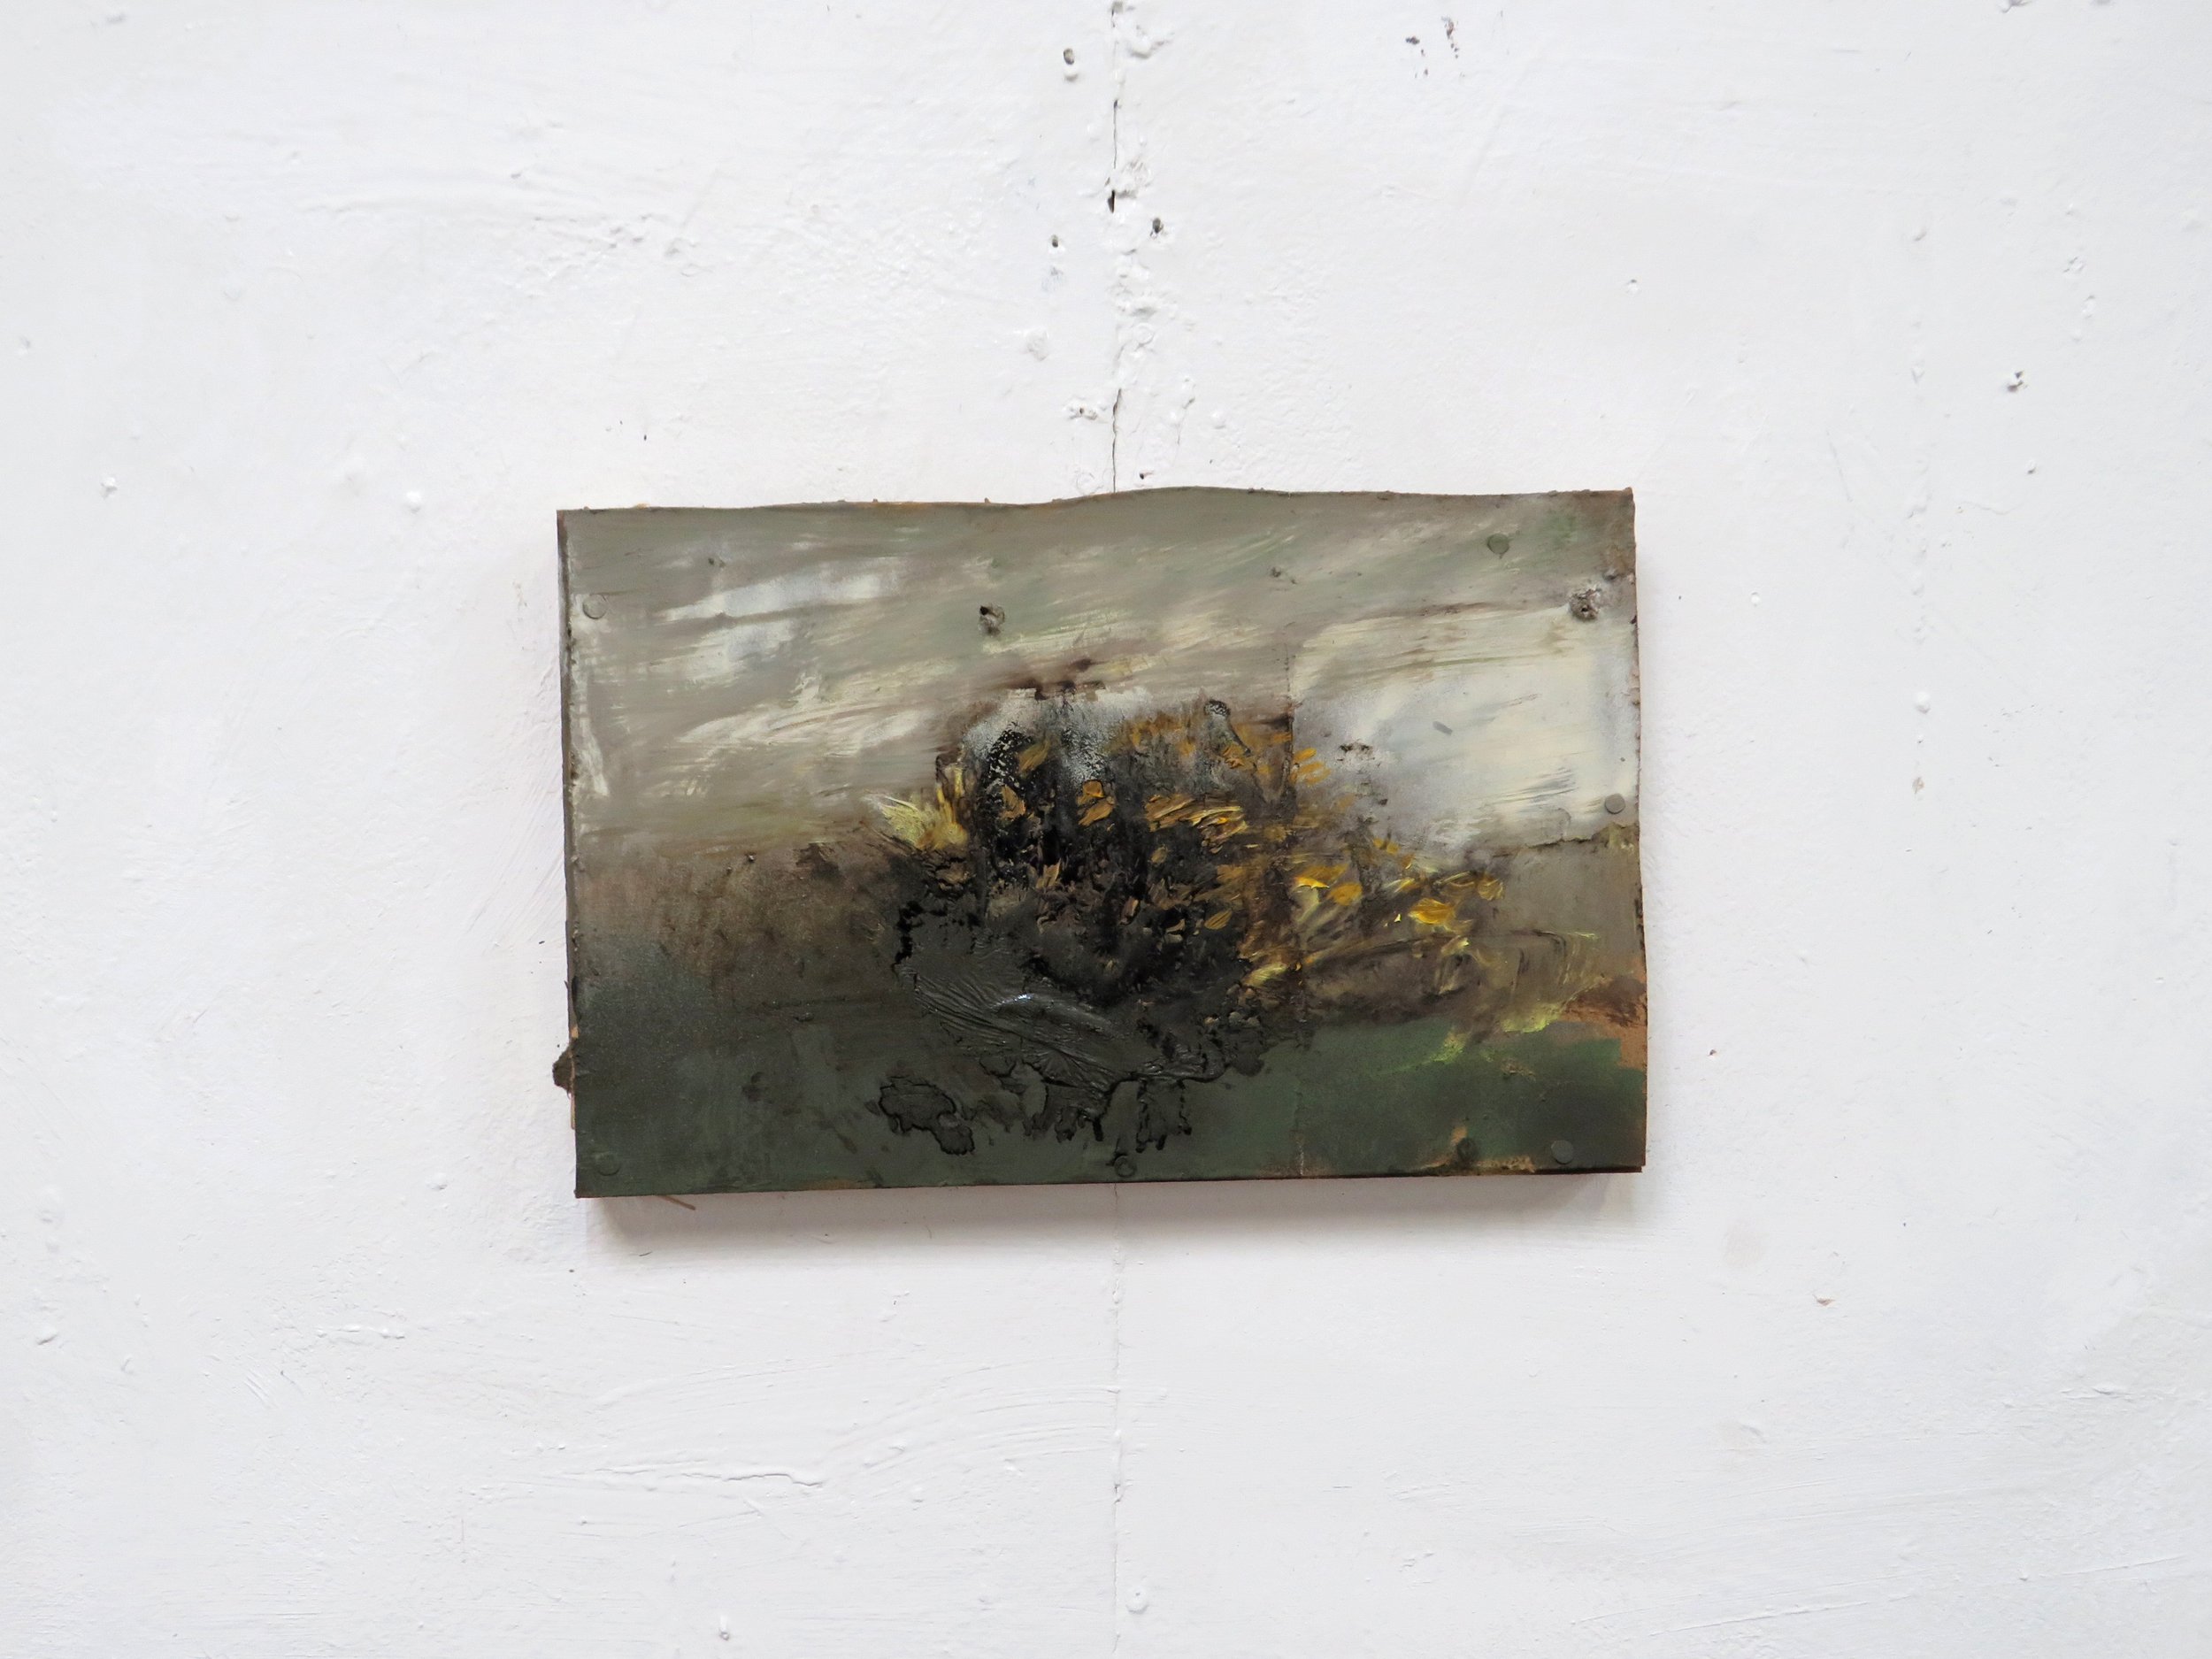 Gorse Bush and storm two 28 x 46 cms